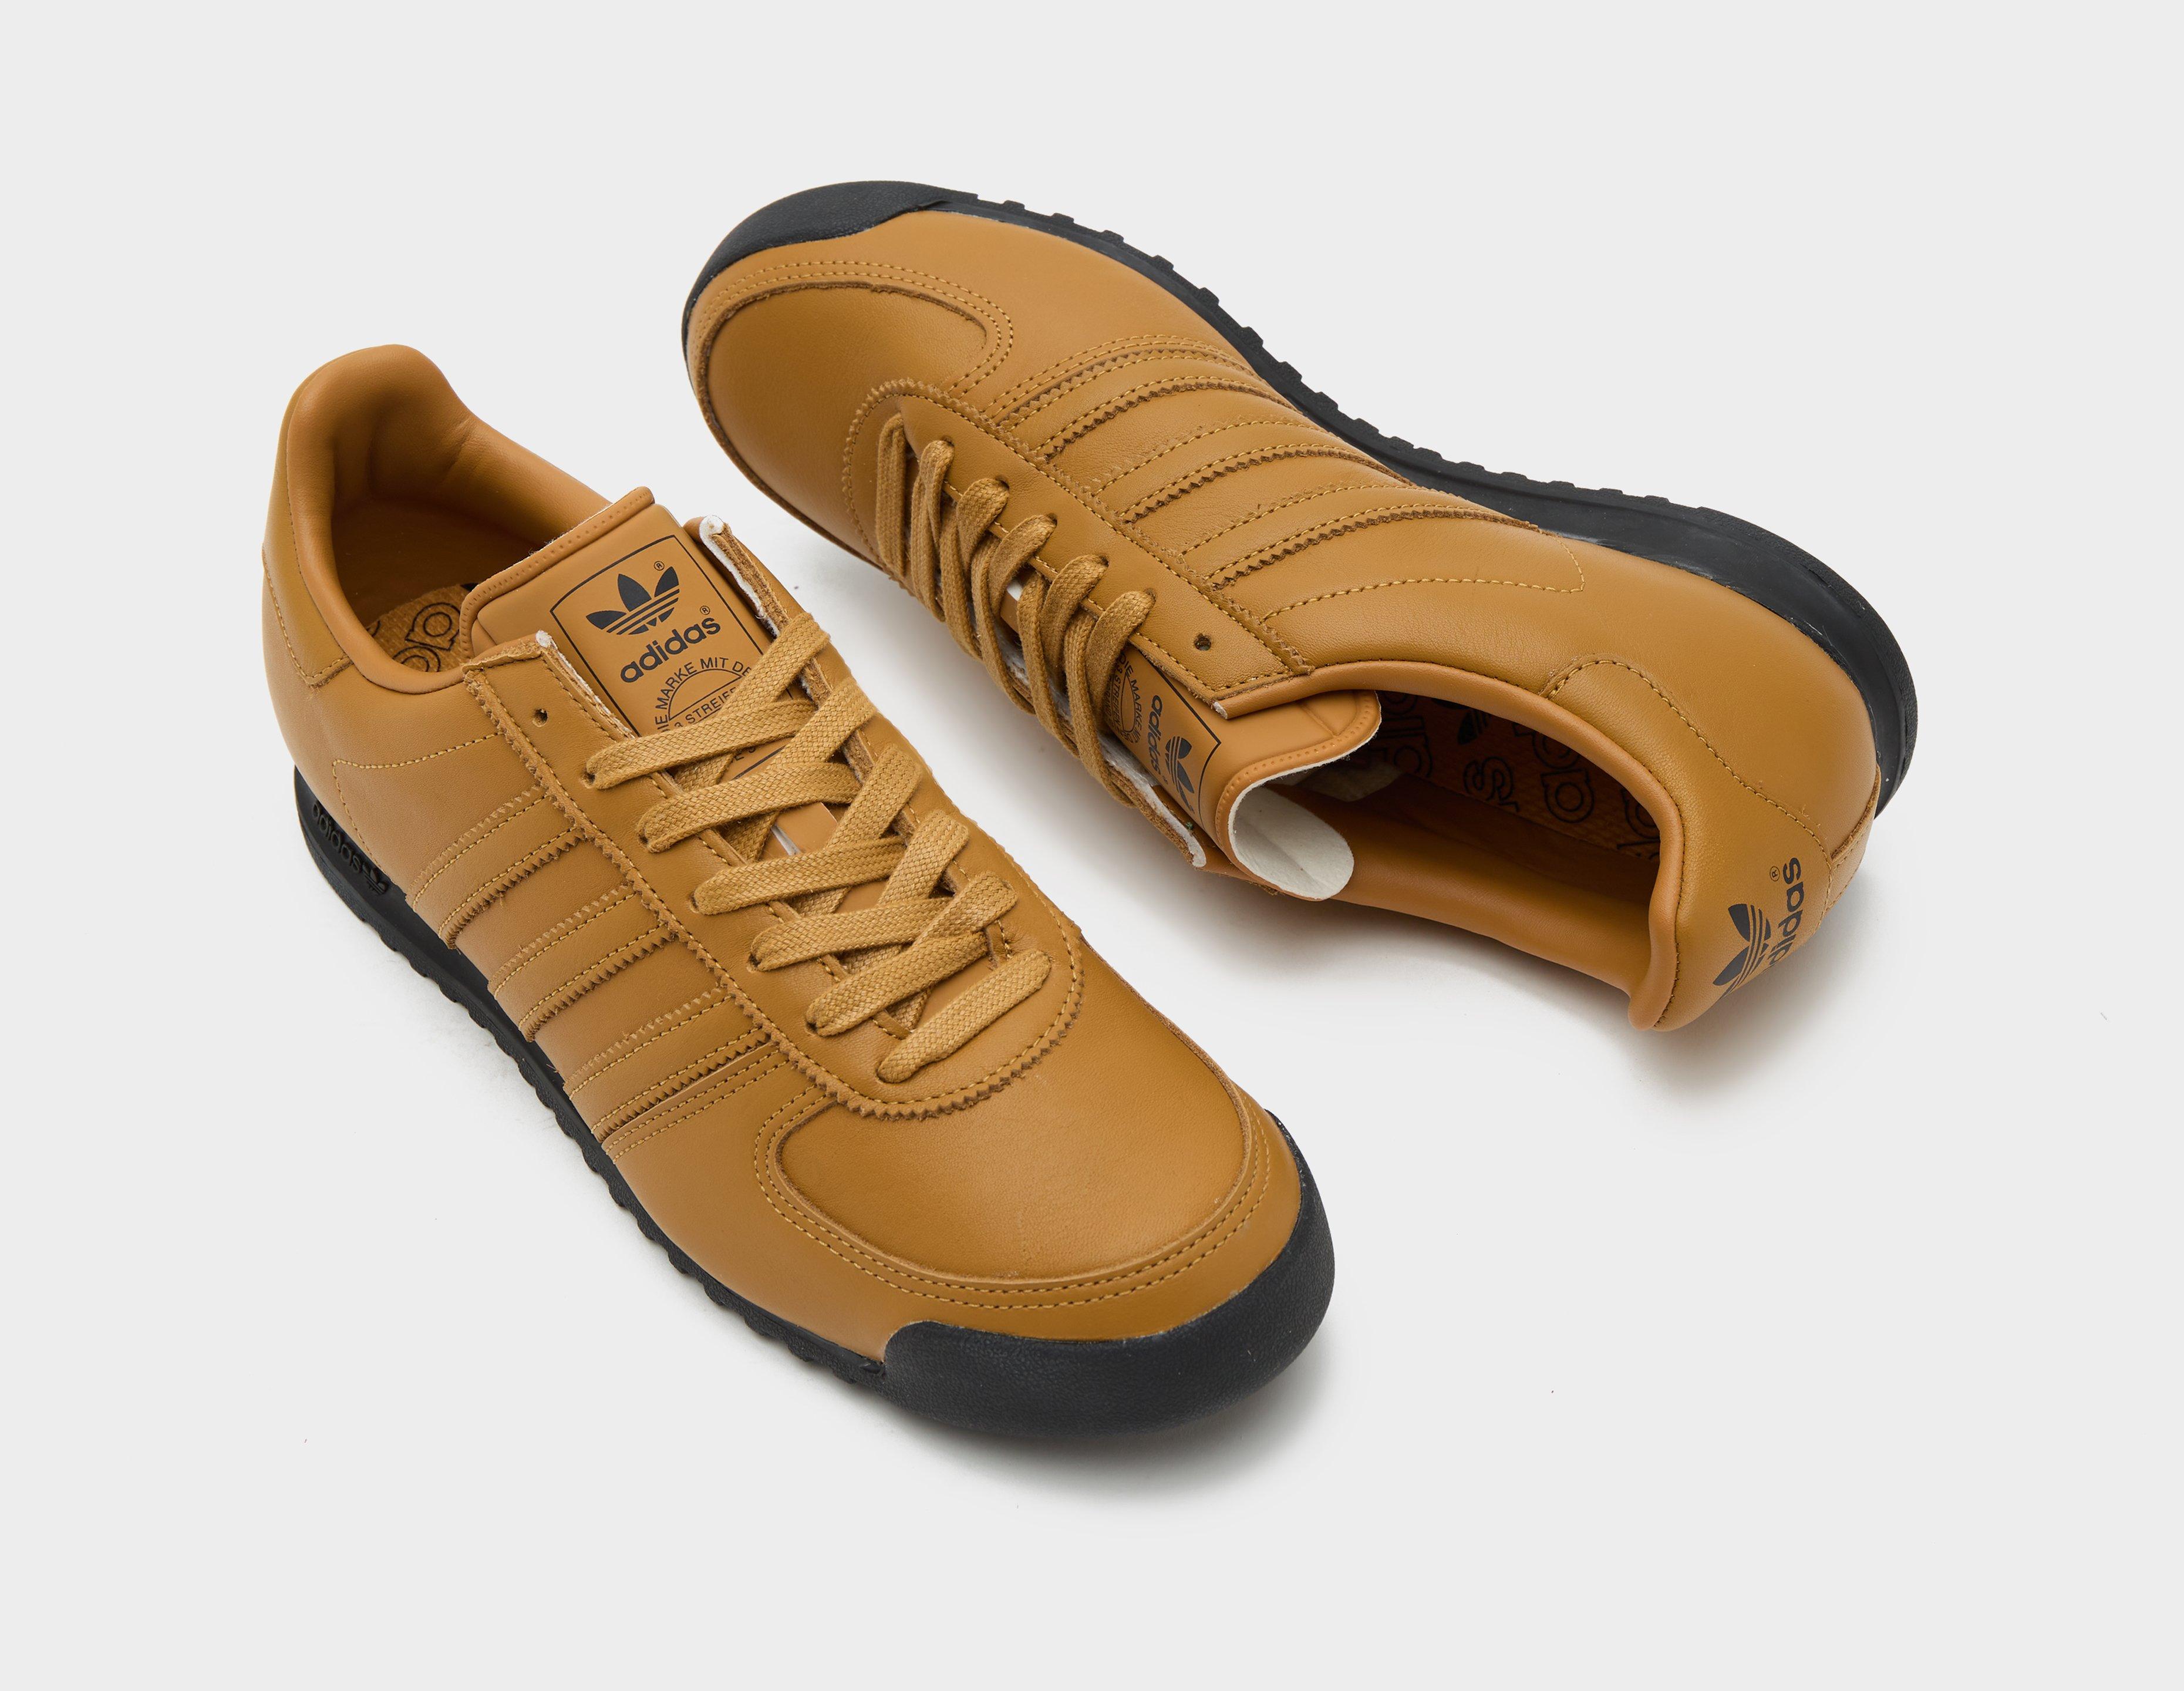 exclusive Women\'s | puma and dress adidas brands for women shoes sale -  Healthdesign? - Brown dress adidas Originals Archive All Team | Sneaker low